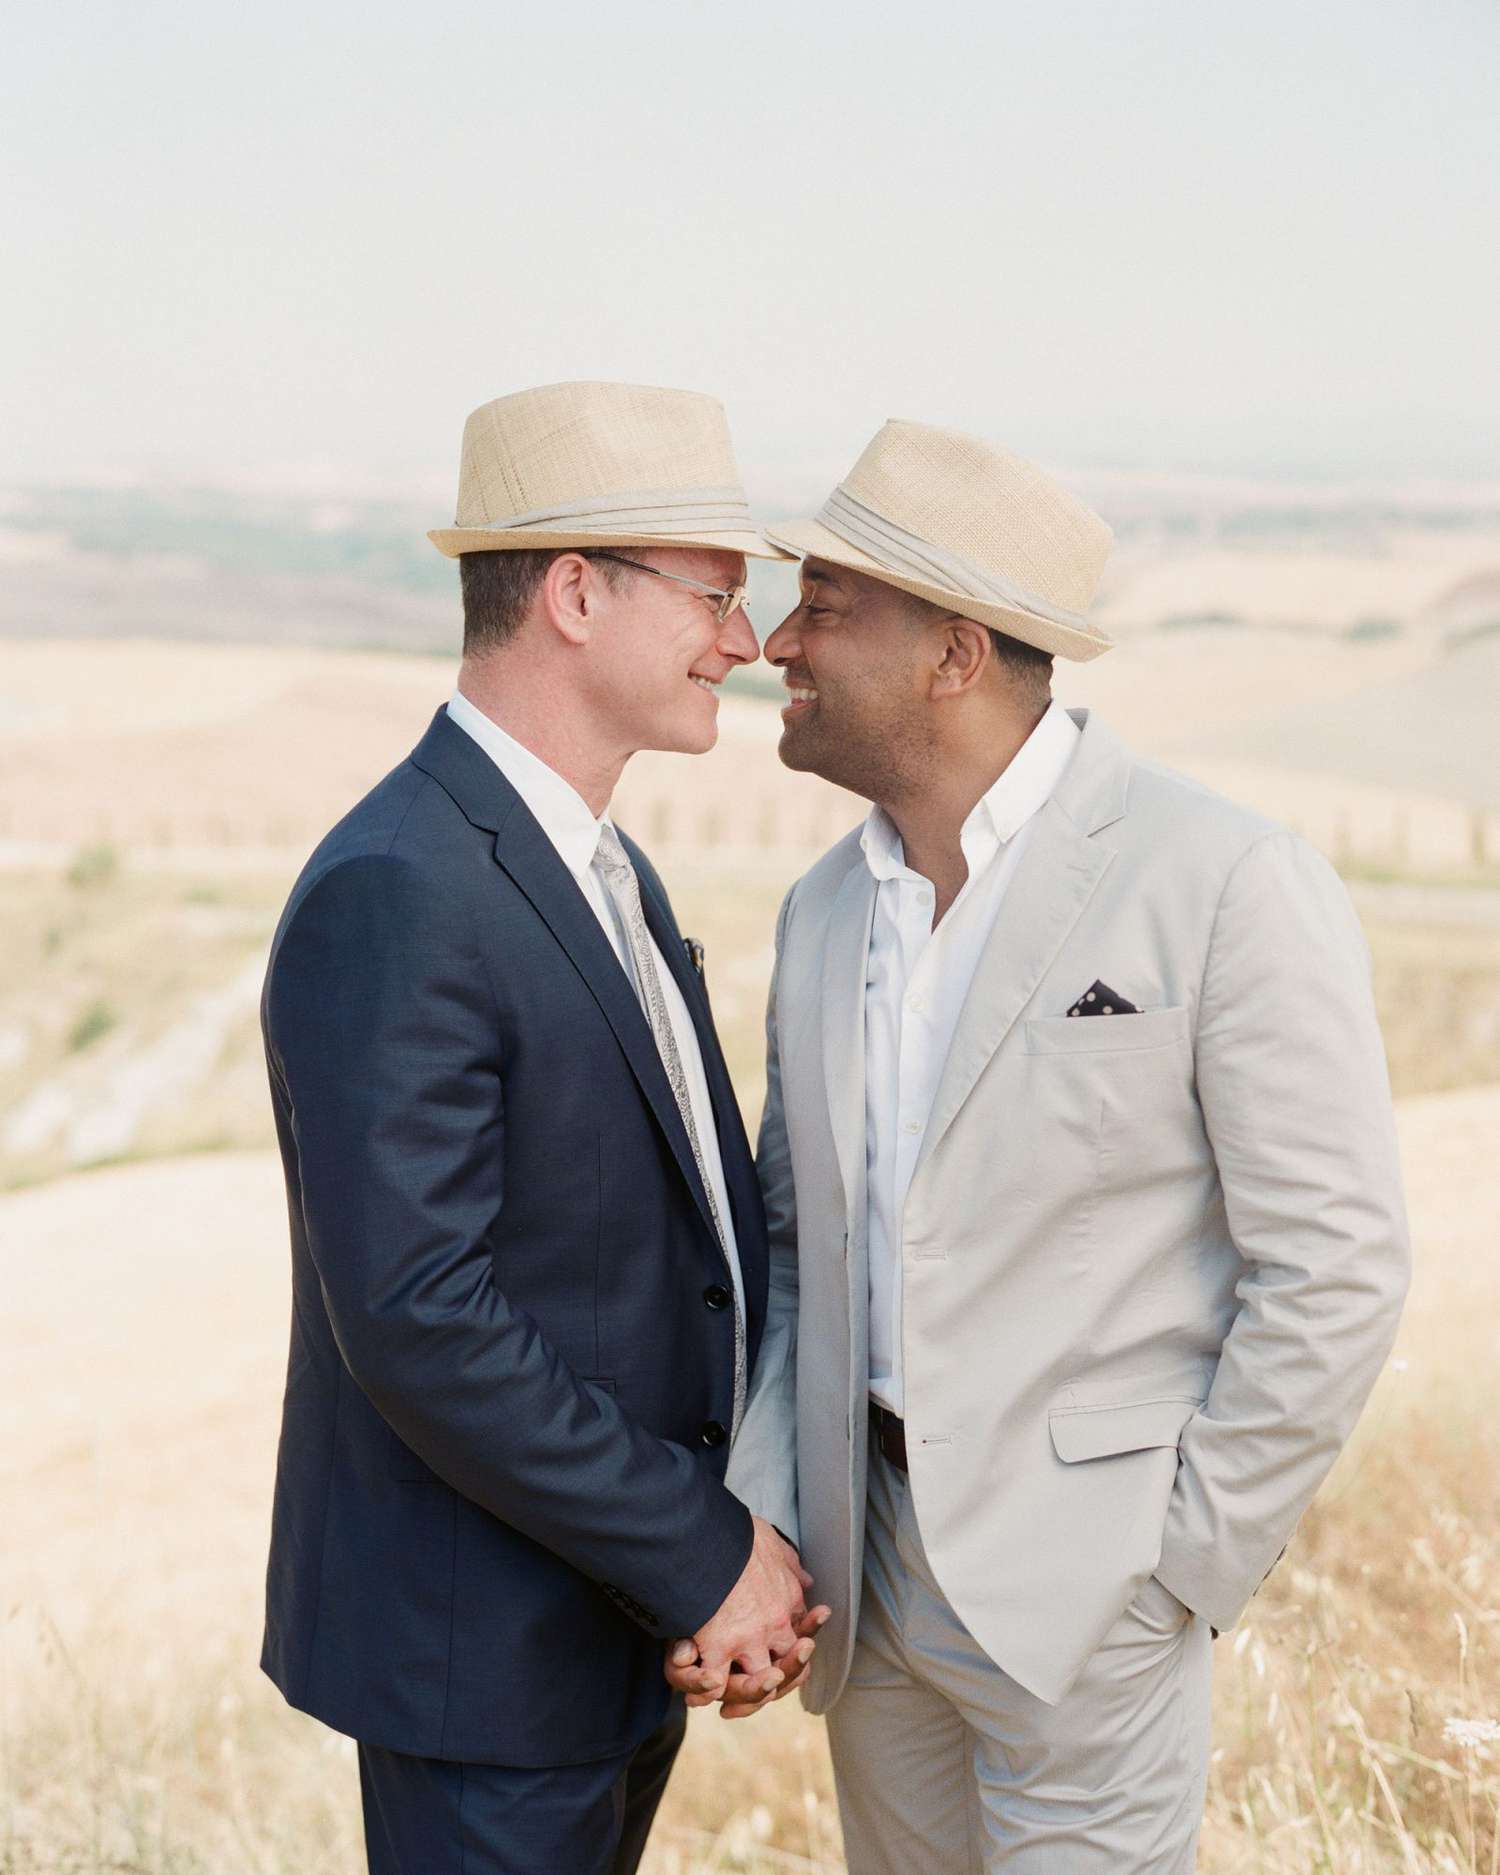 <p>On the morning of their big day, this lucky couple traversed Tuscany in an old Fiat, taking an array of pre-wedding portraits."We felt like models on a photo shoot&mdash;it was so much fun!" said one of the grooms. </p>
                            